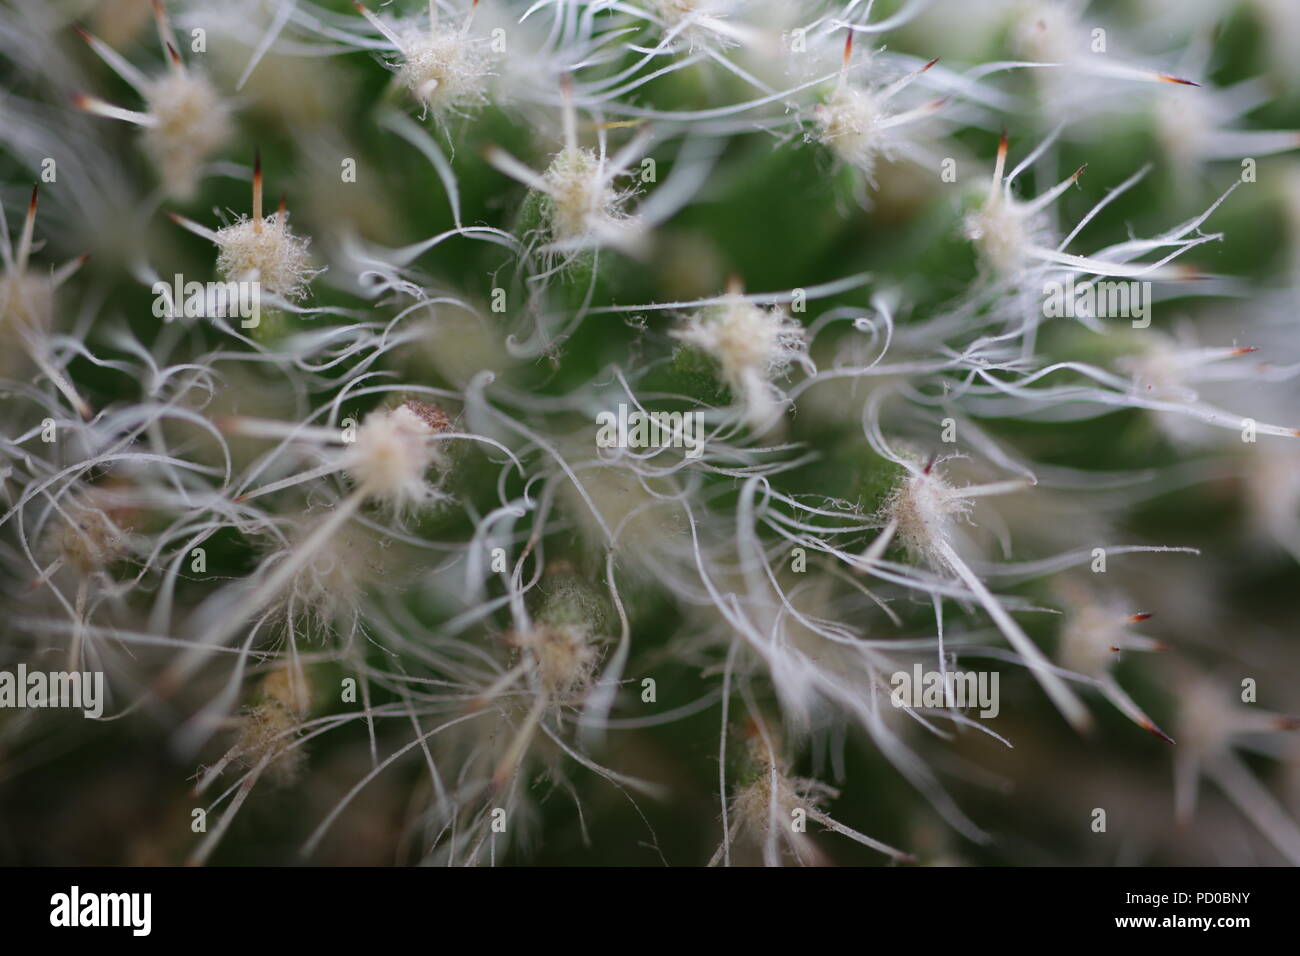 Close up of cactus spines or glochids Stock Photo